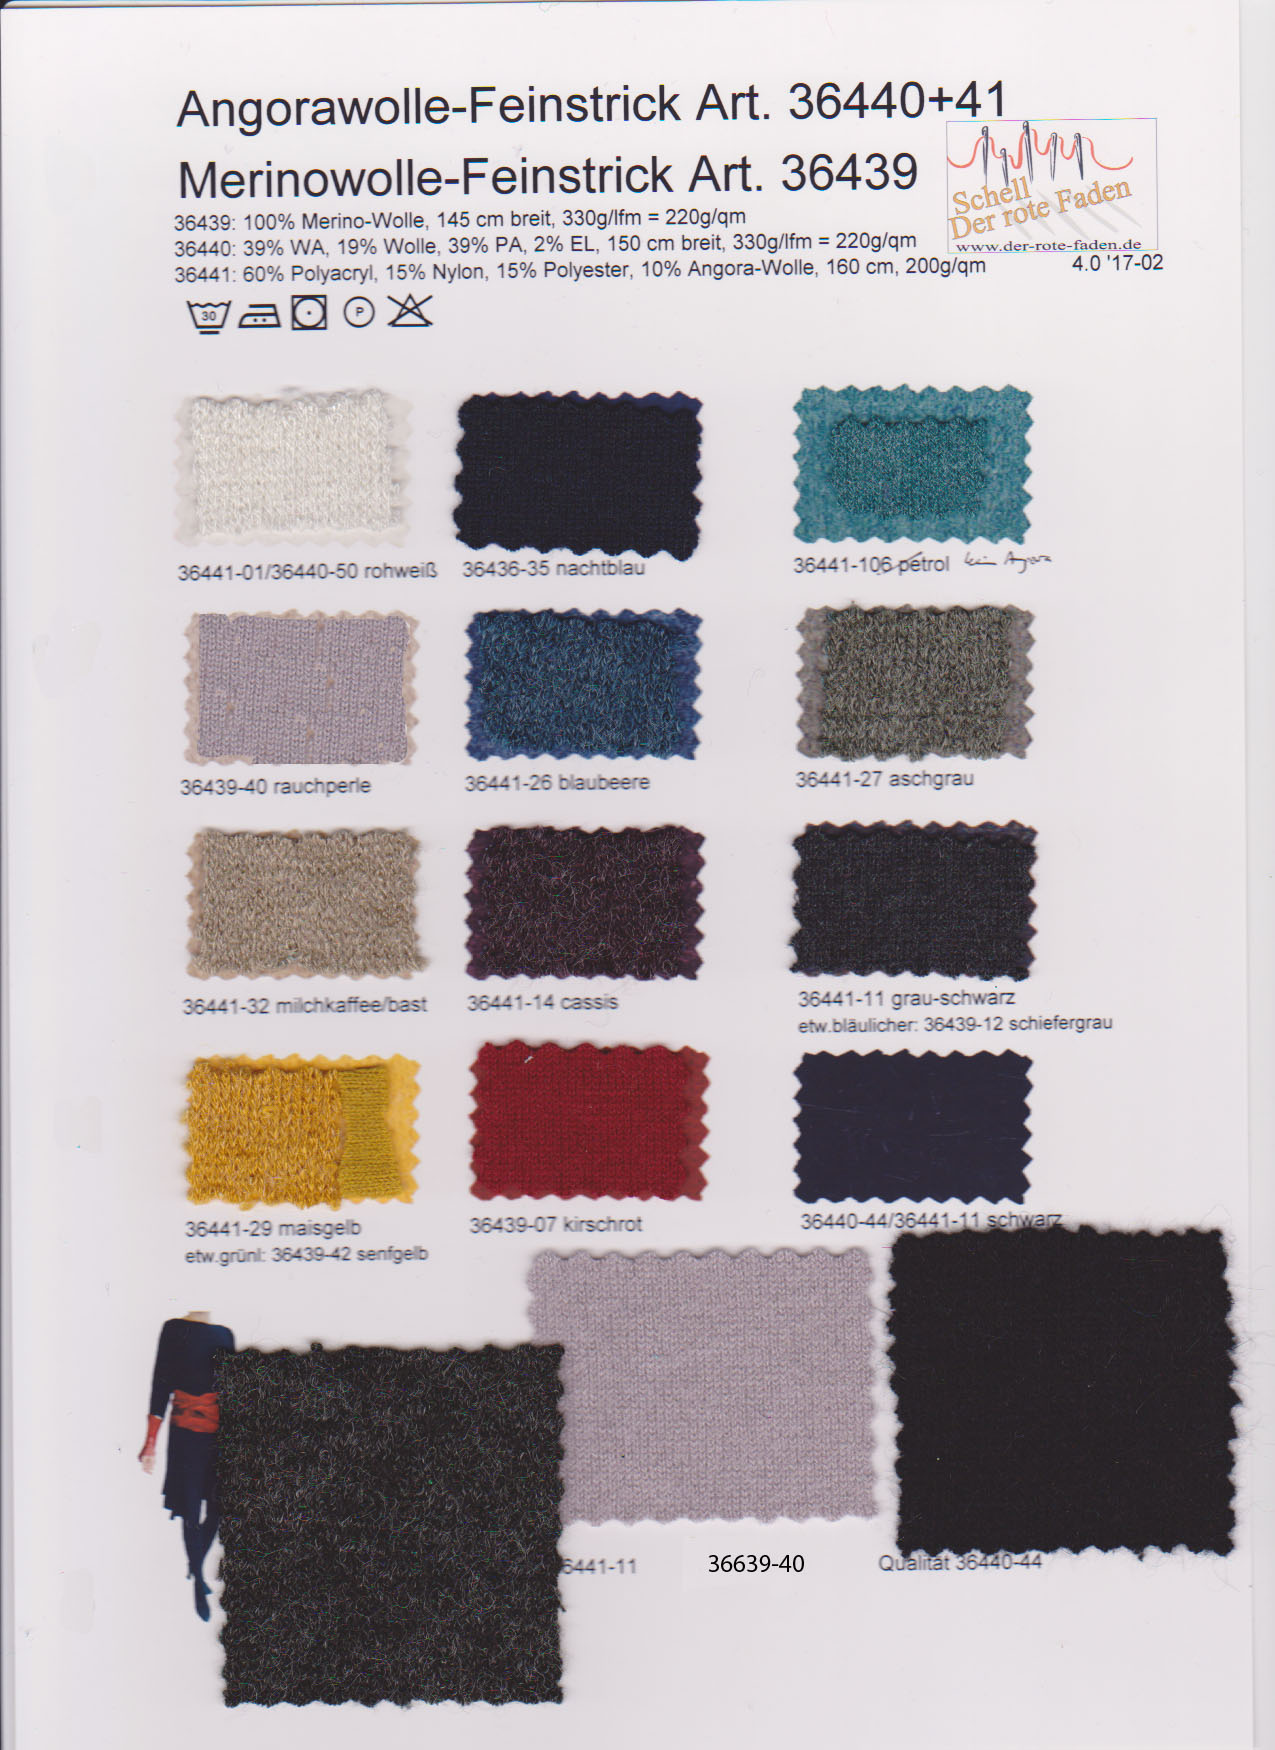 knitwear angora, cotton, viscose, printed color chart with some original patterns